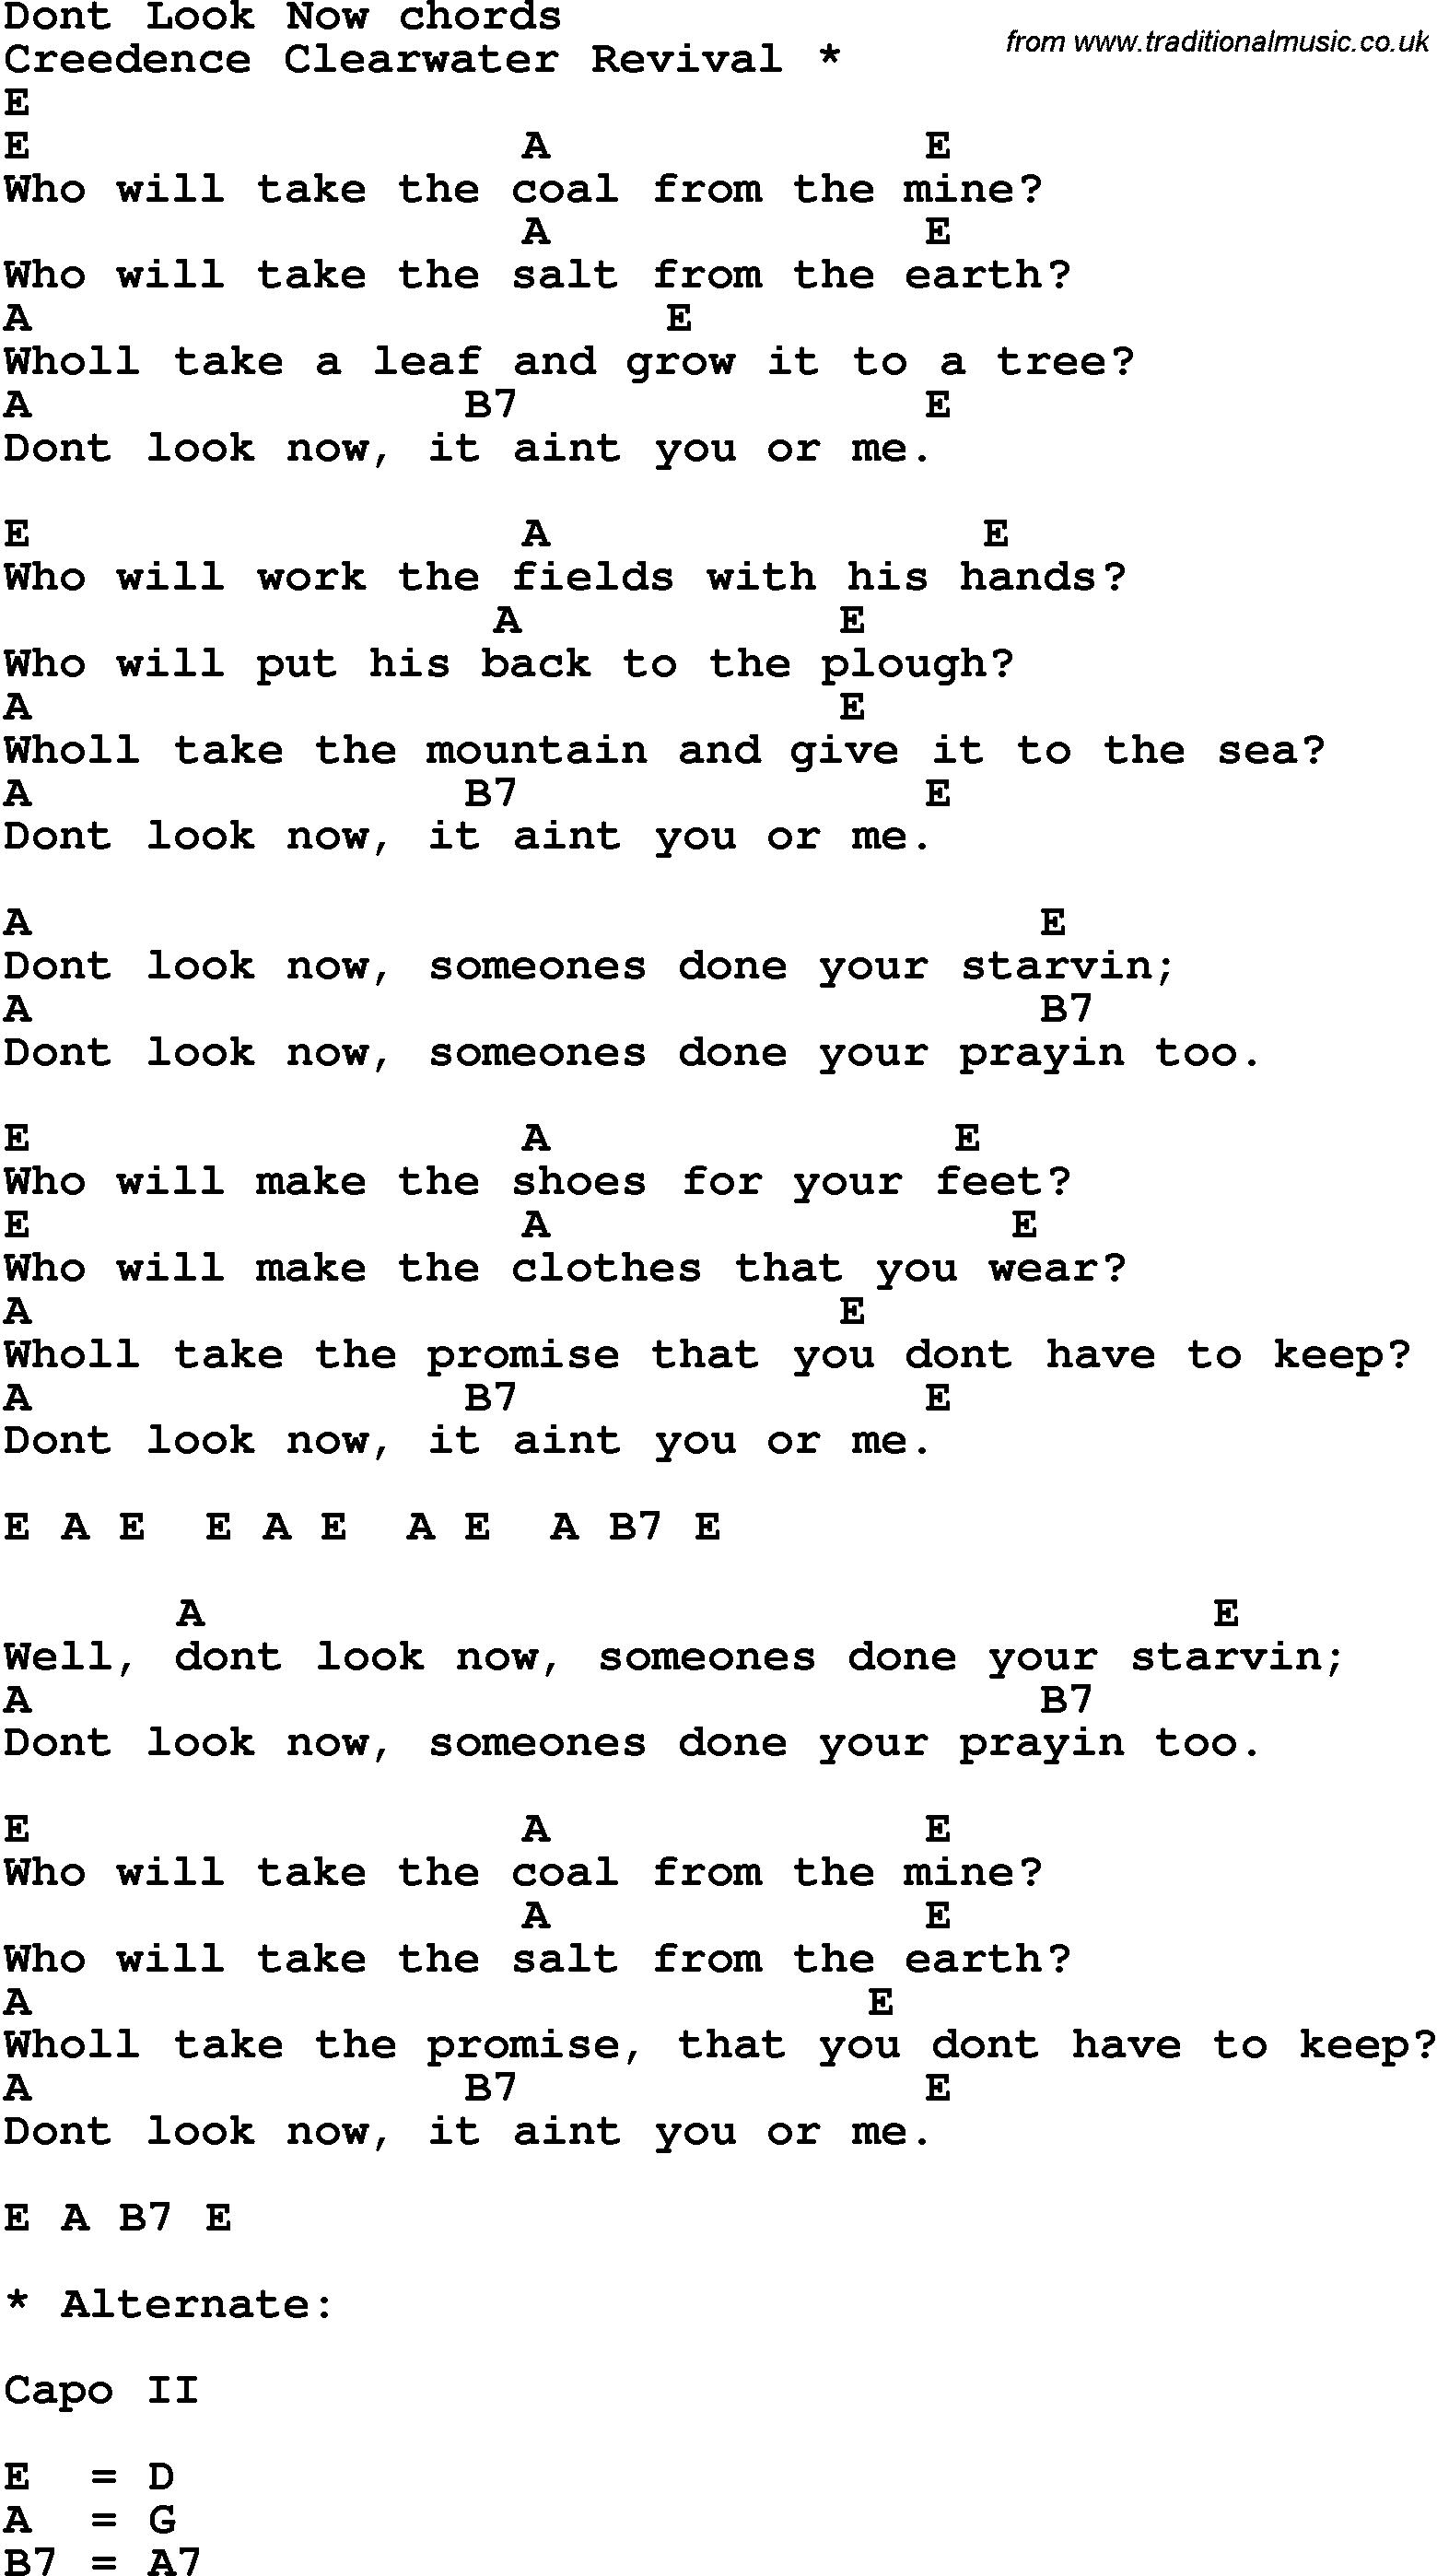 Song Lyrics with guitar chords for Don't Look Now